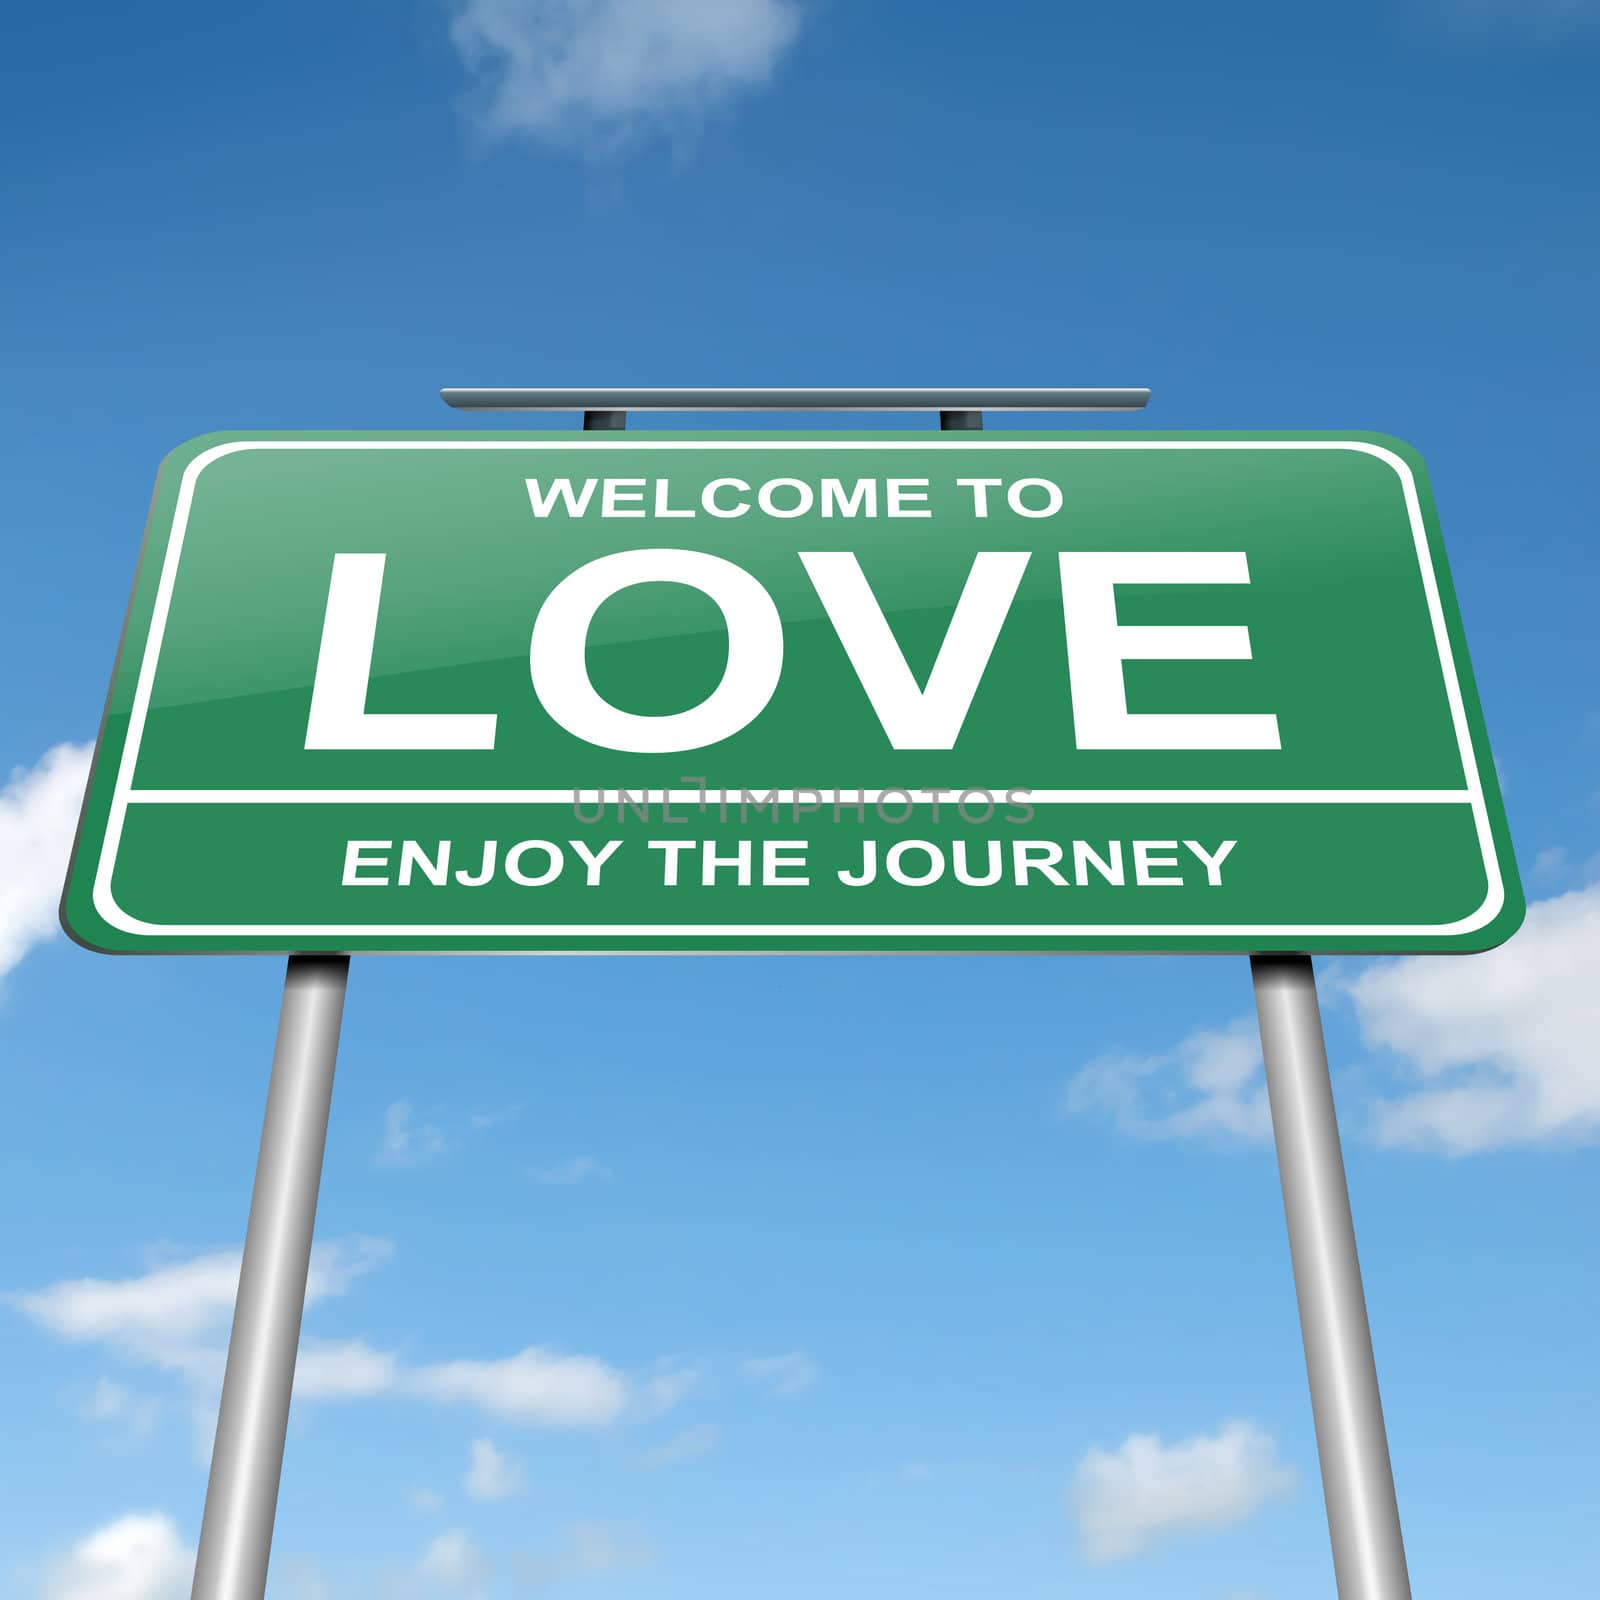 Illustration depicting a green roadsign with a love concept. Blue sky background.